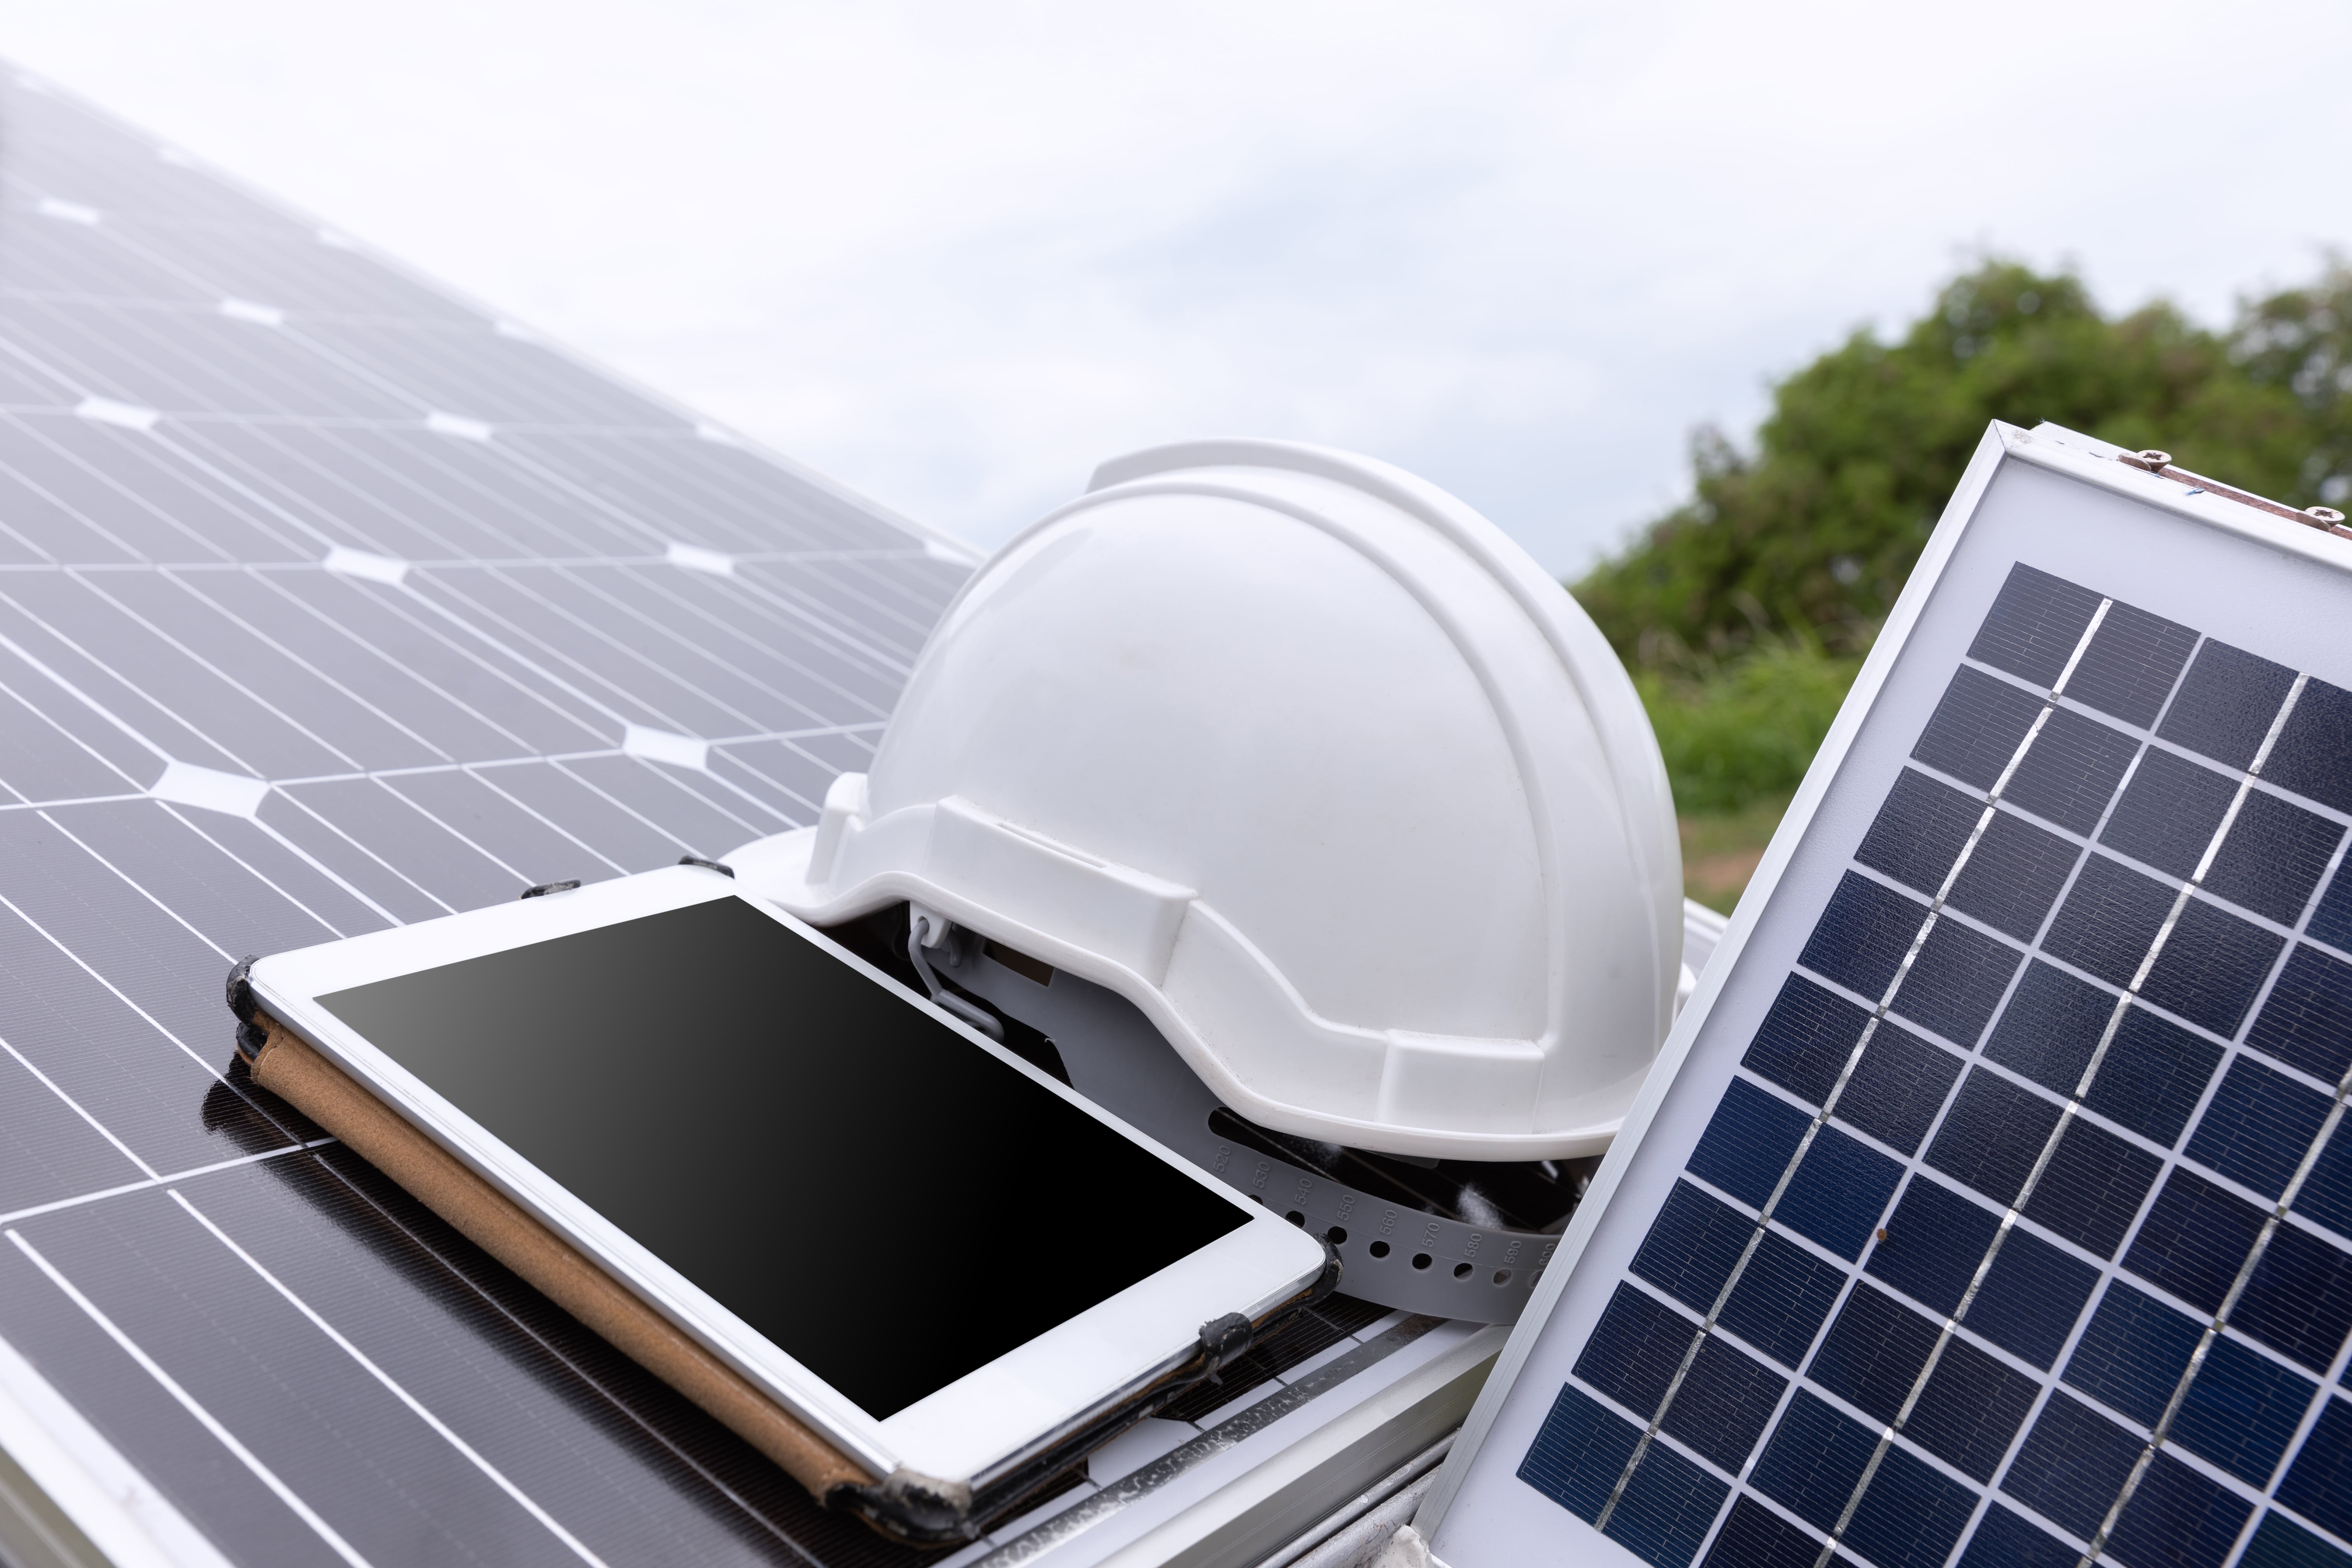 Helmet with tablet on solarpanel